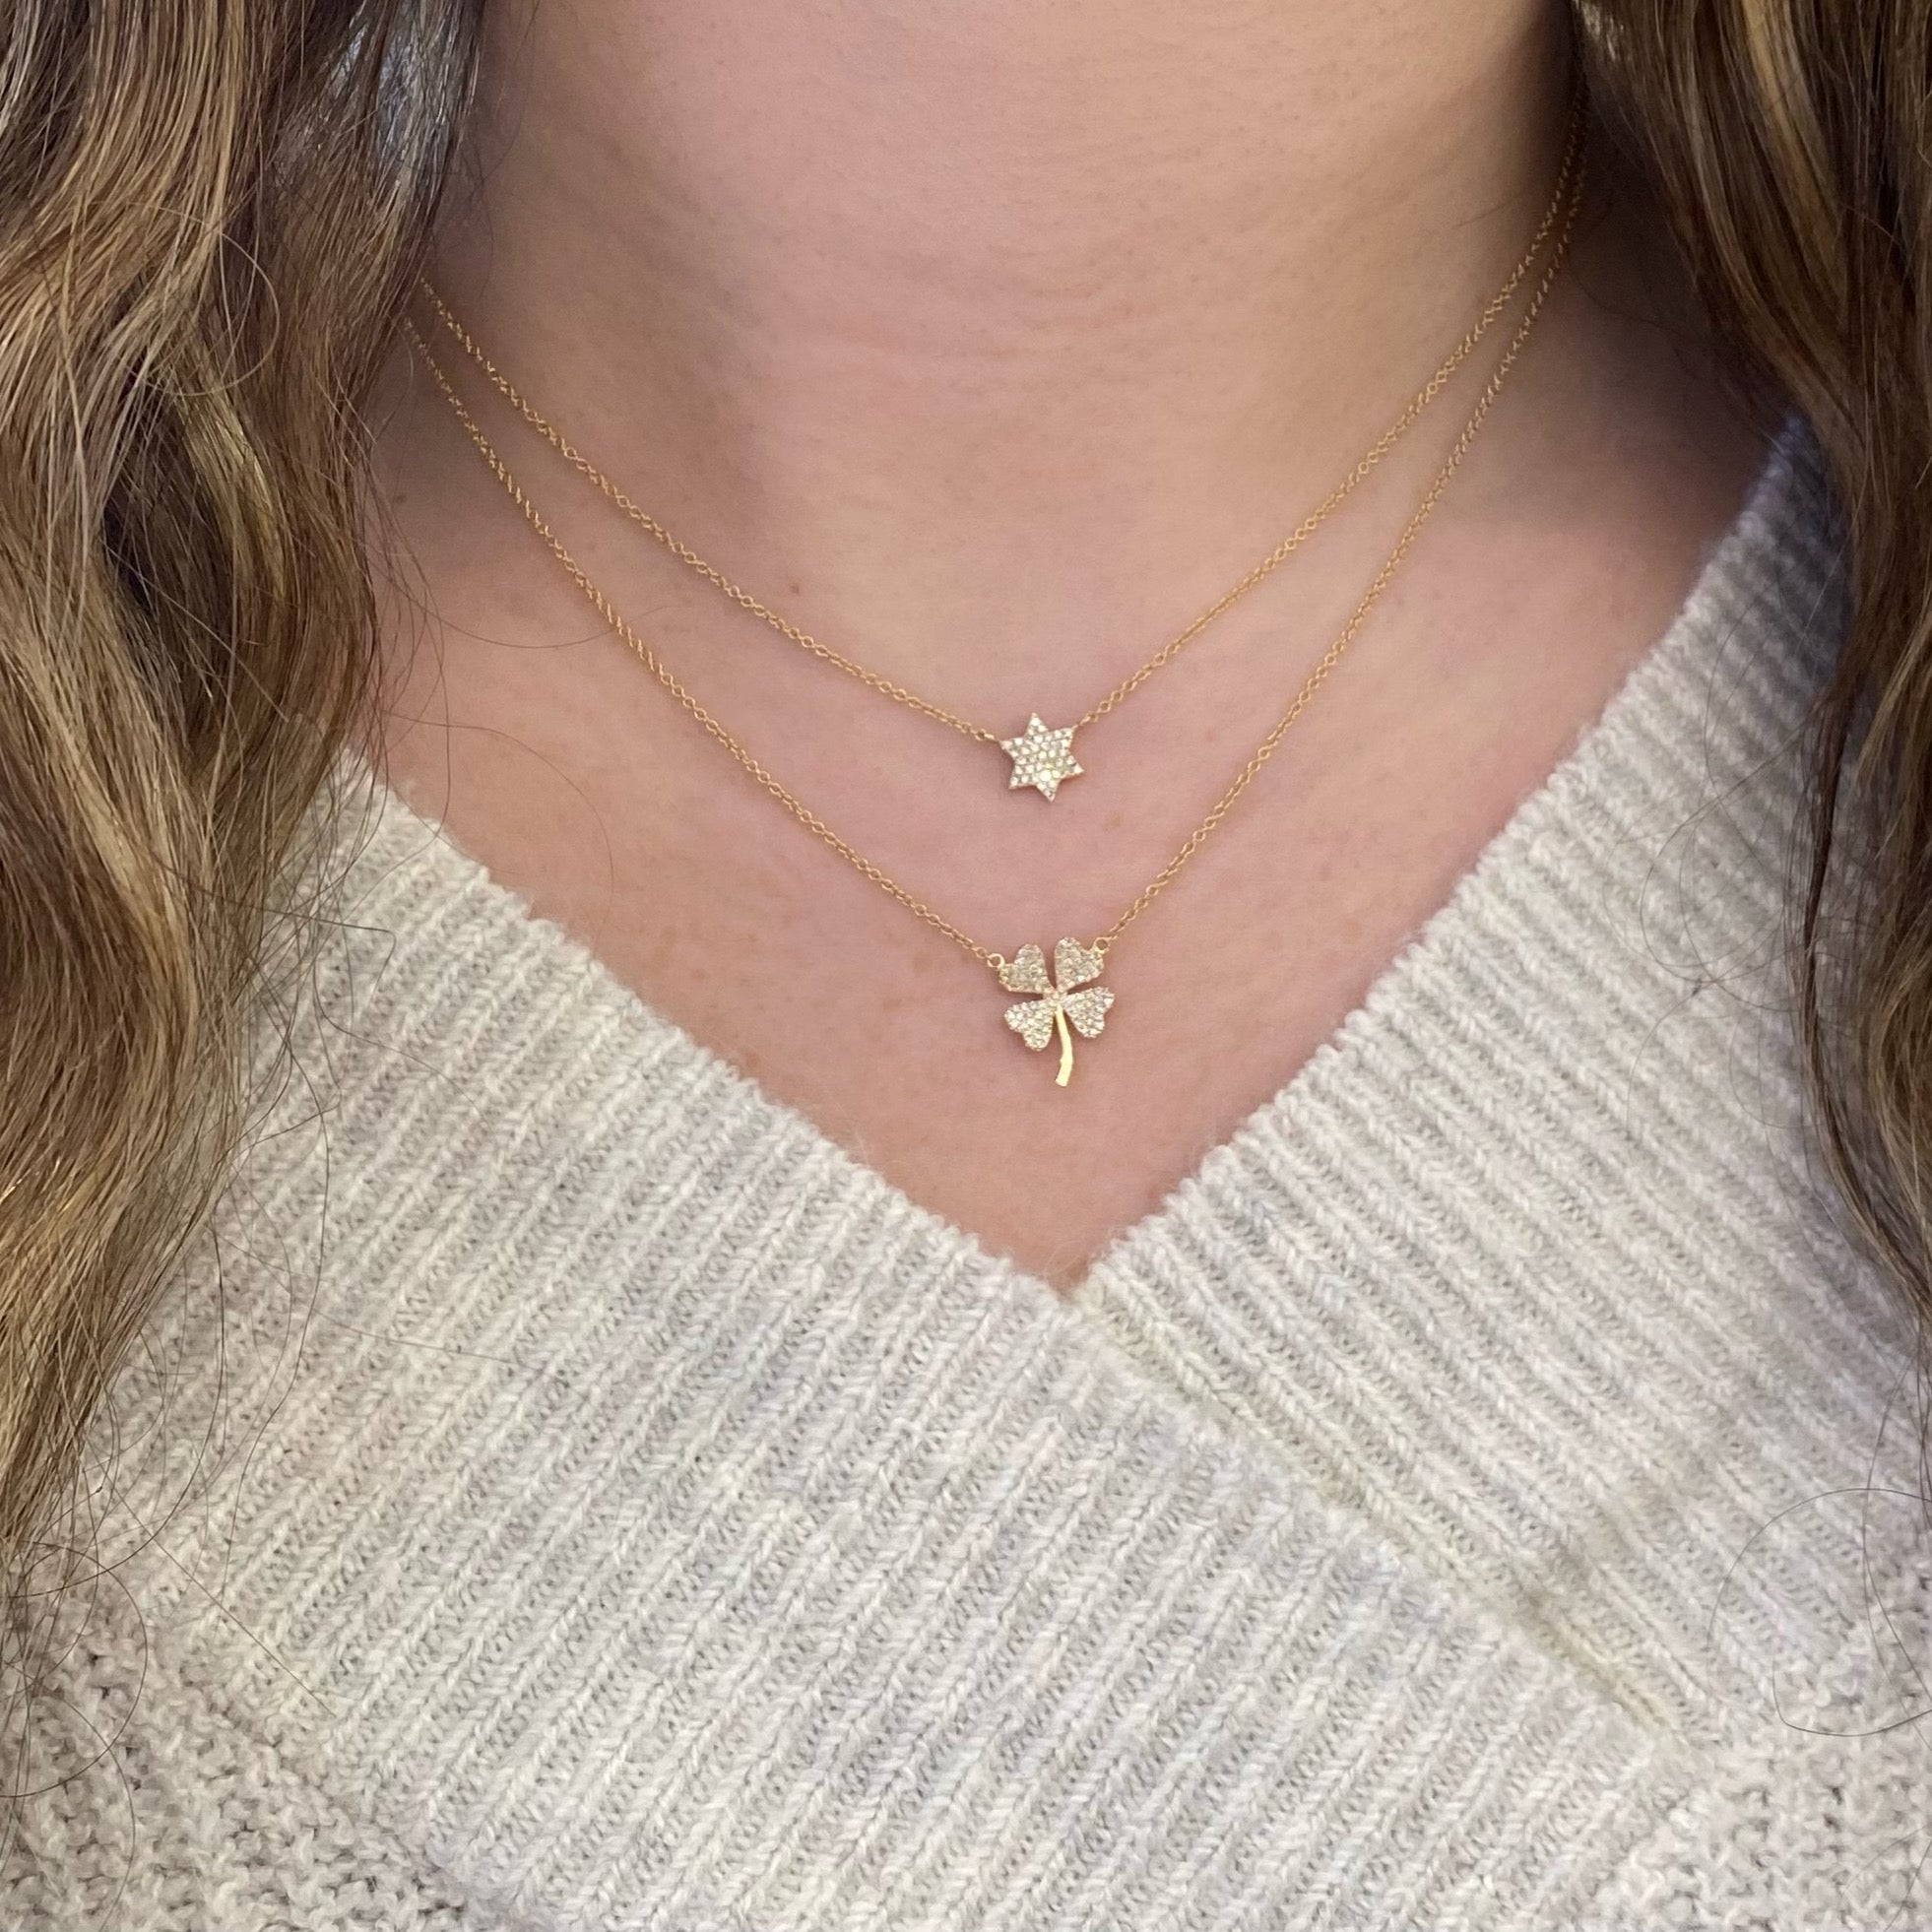 Gold clover necklace